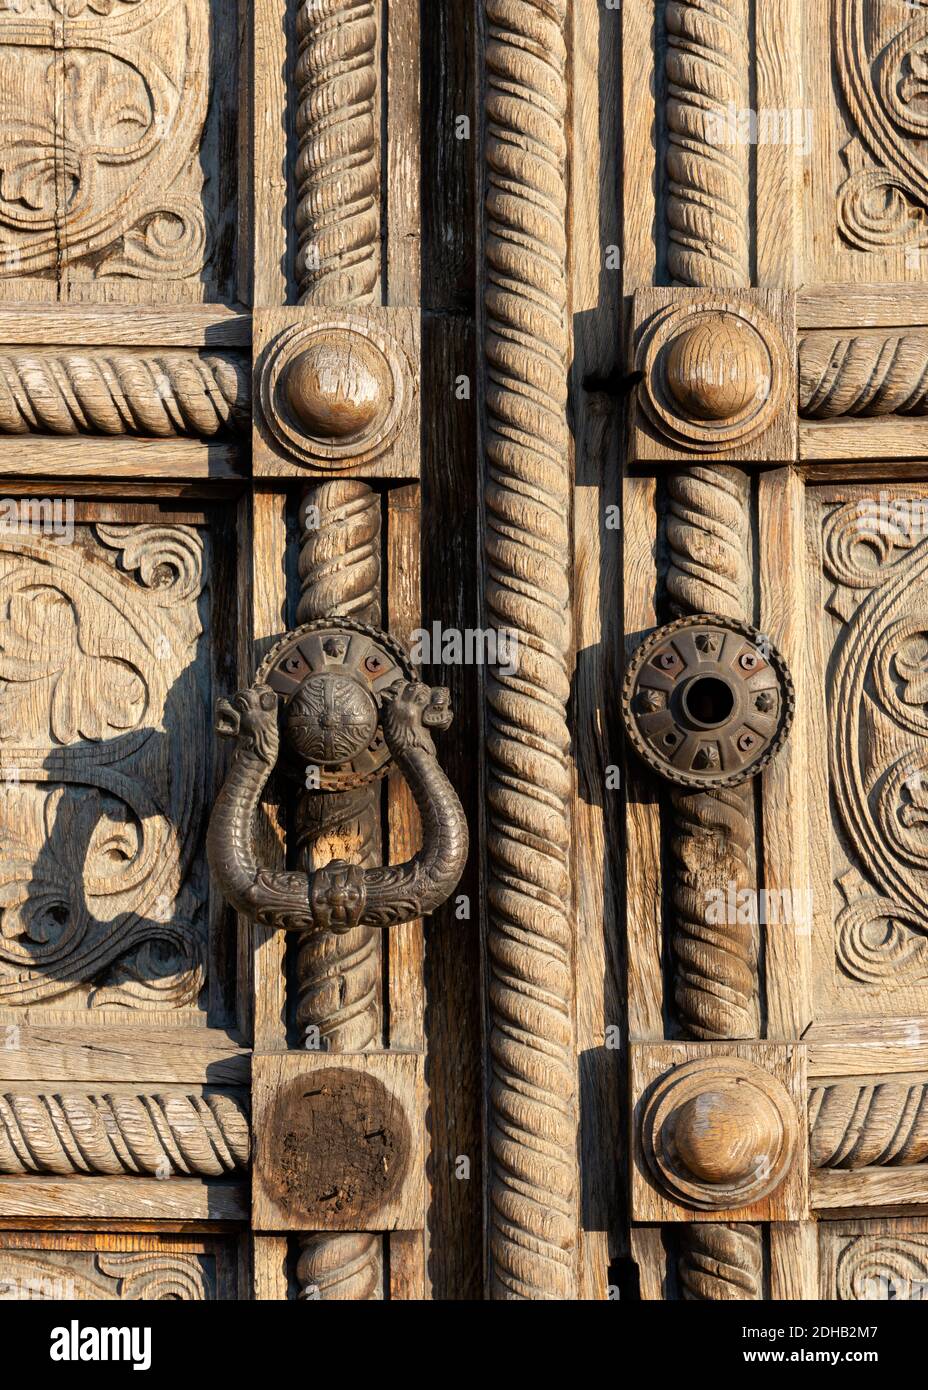 Old carved wood panel door close up detail of the historic St. Alexander Nevsky Orthodox Cathedral church in Sofia Bulgaria Eastern Europe Stock Photo